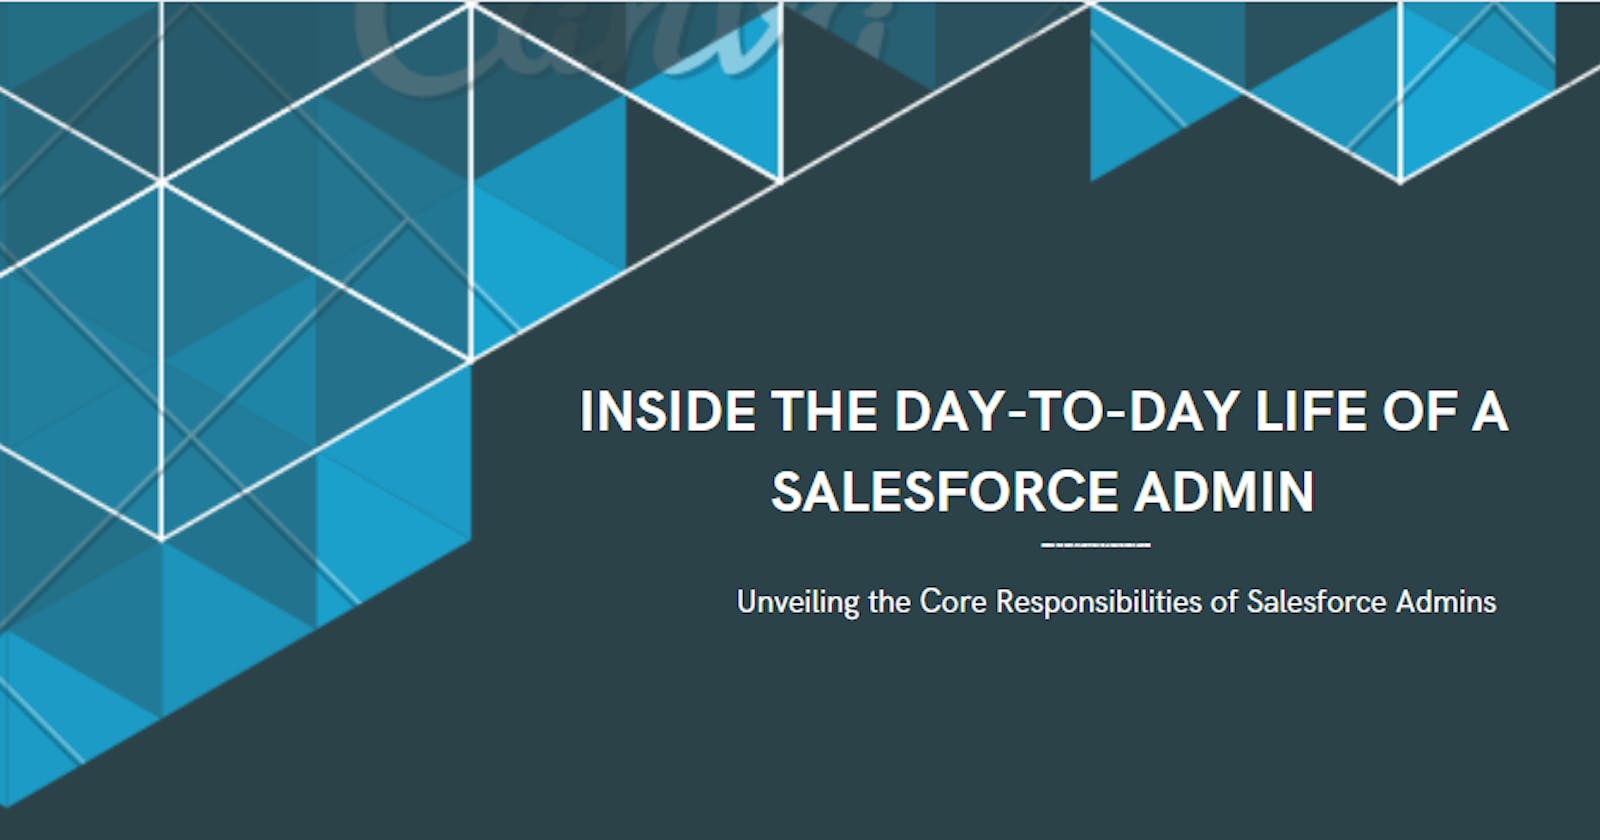 Inside the Day-to-Day Life of a Salesforce Admin